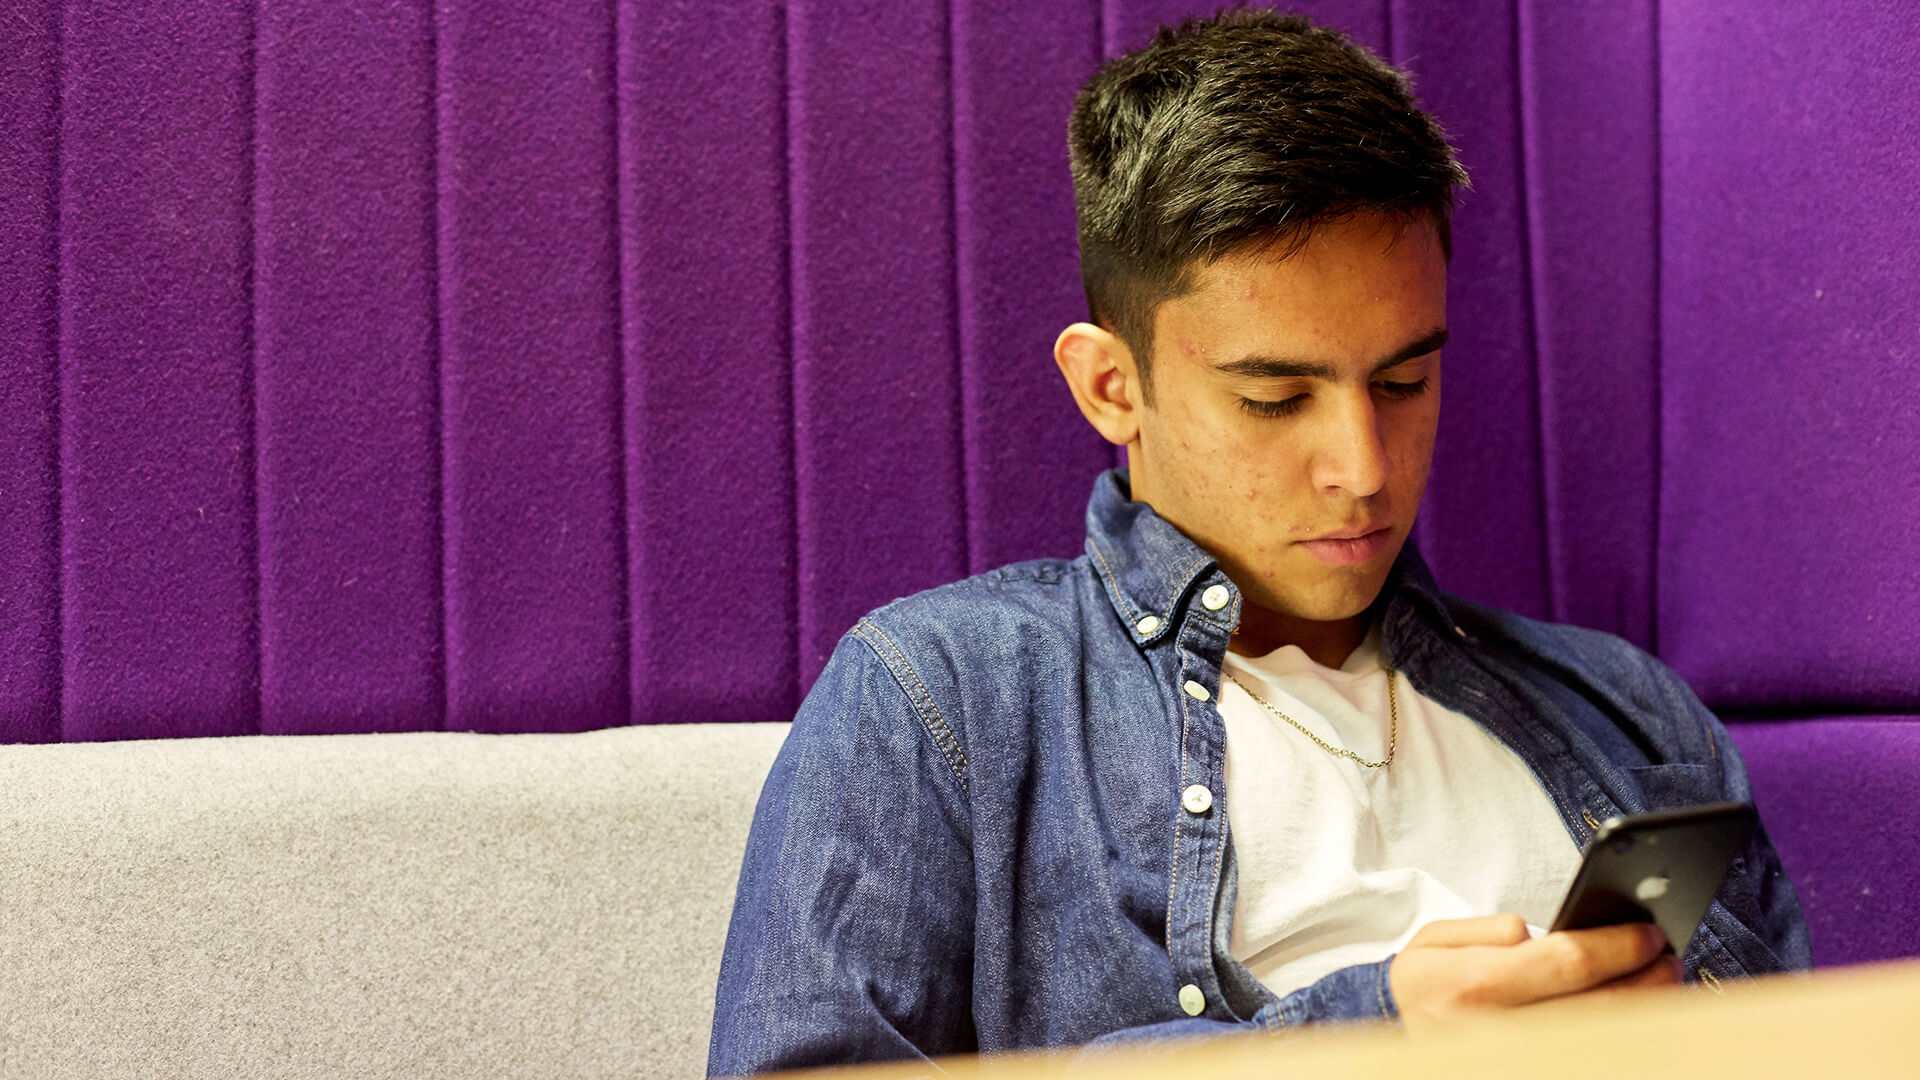 A young person in a blue denim shirt looks at his phone while sitting down against a grey sofa with a purple wall.